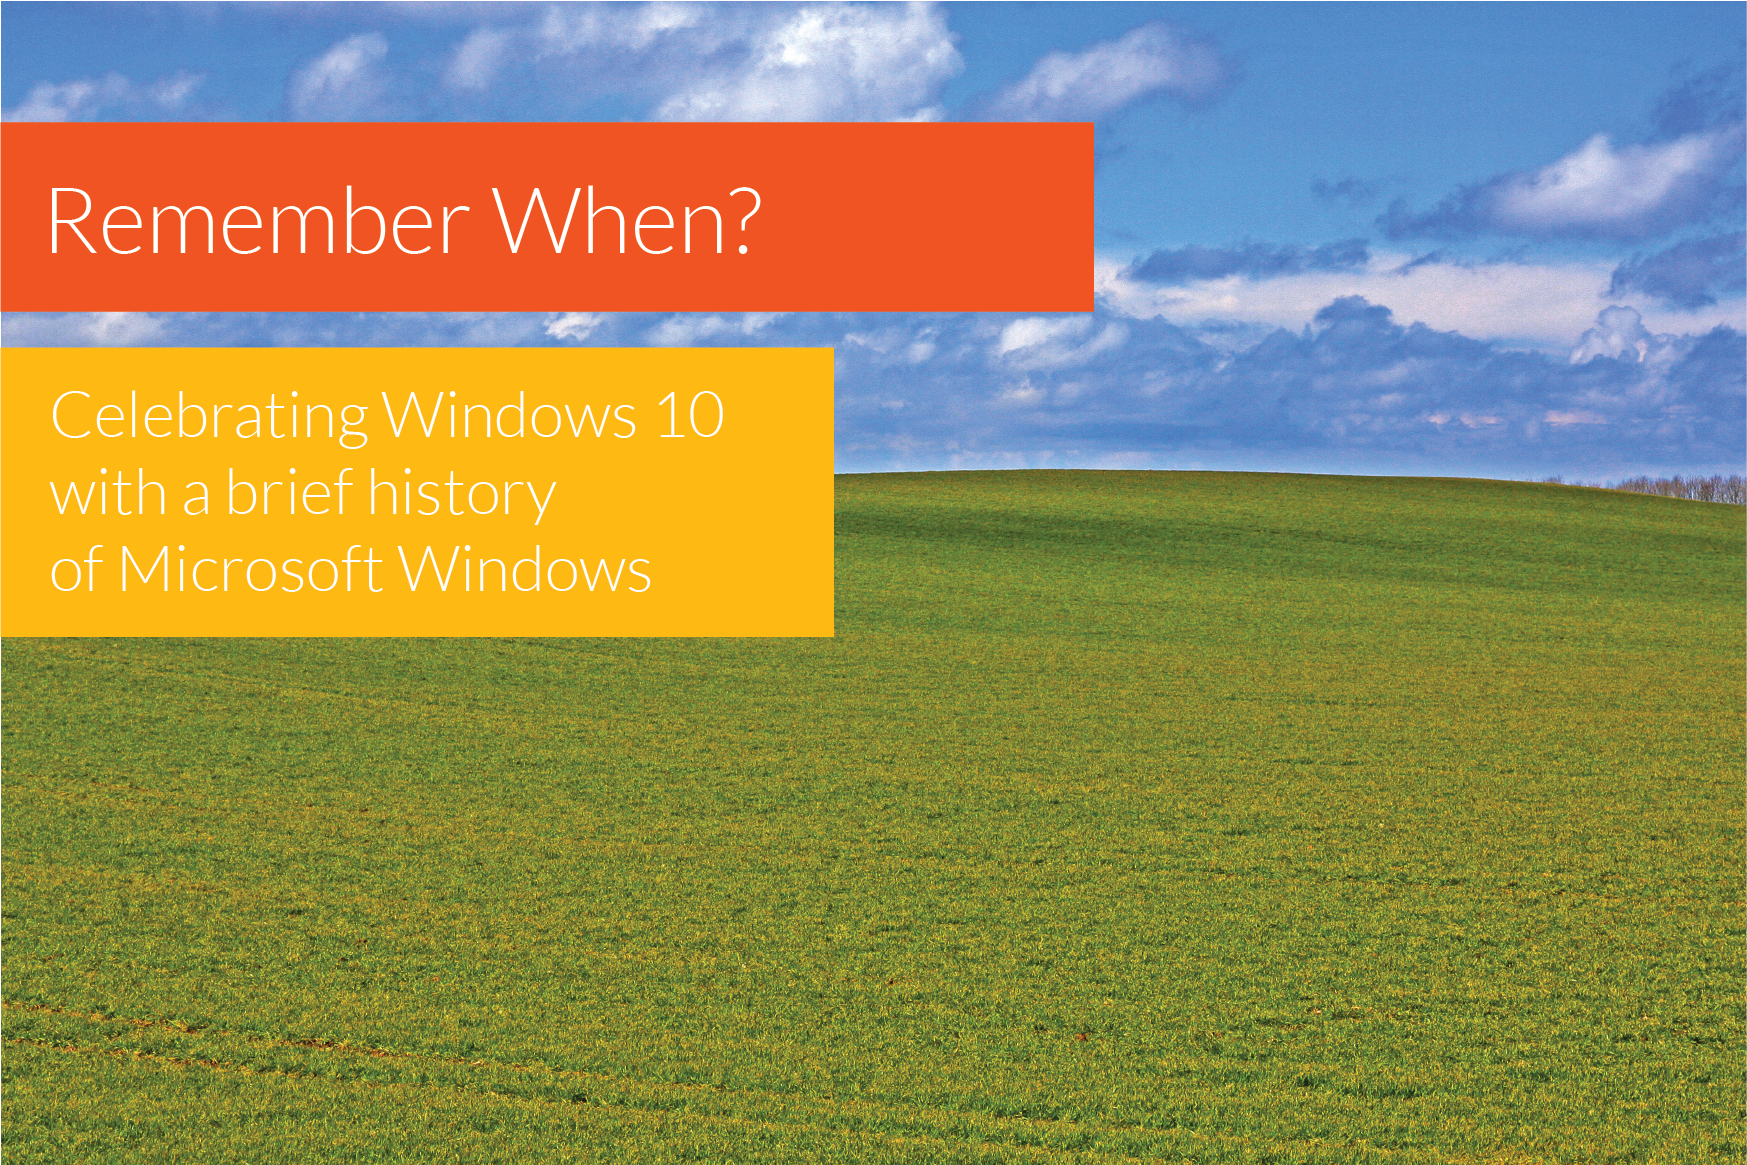 Remember When? A brief history of Microsoft Windows.